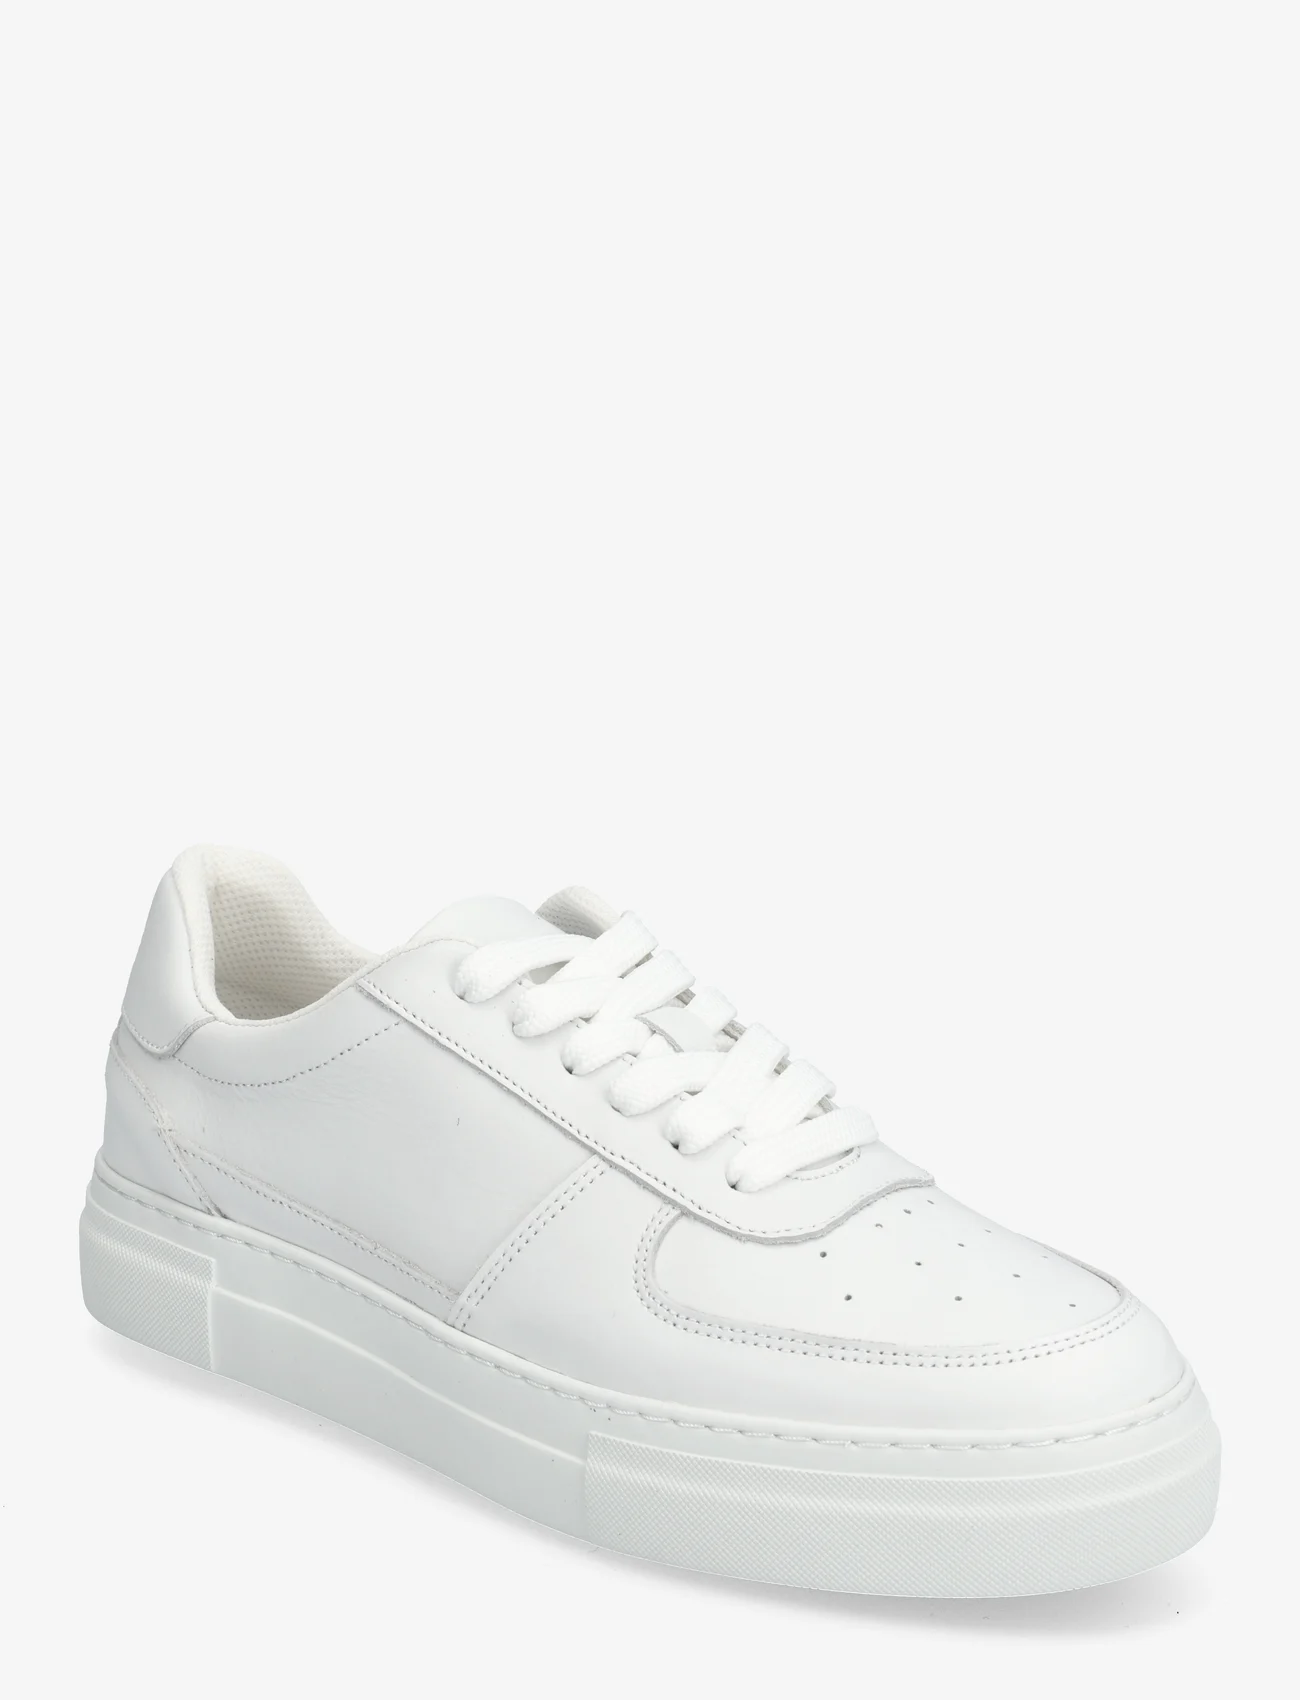 Selected Homme - SLHHARALD LEATHER SNEAKER - low tops - white - 0